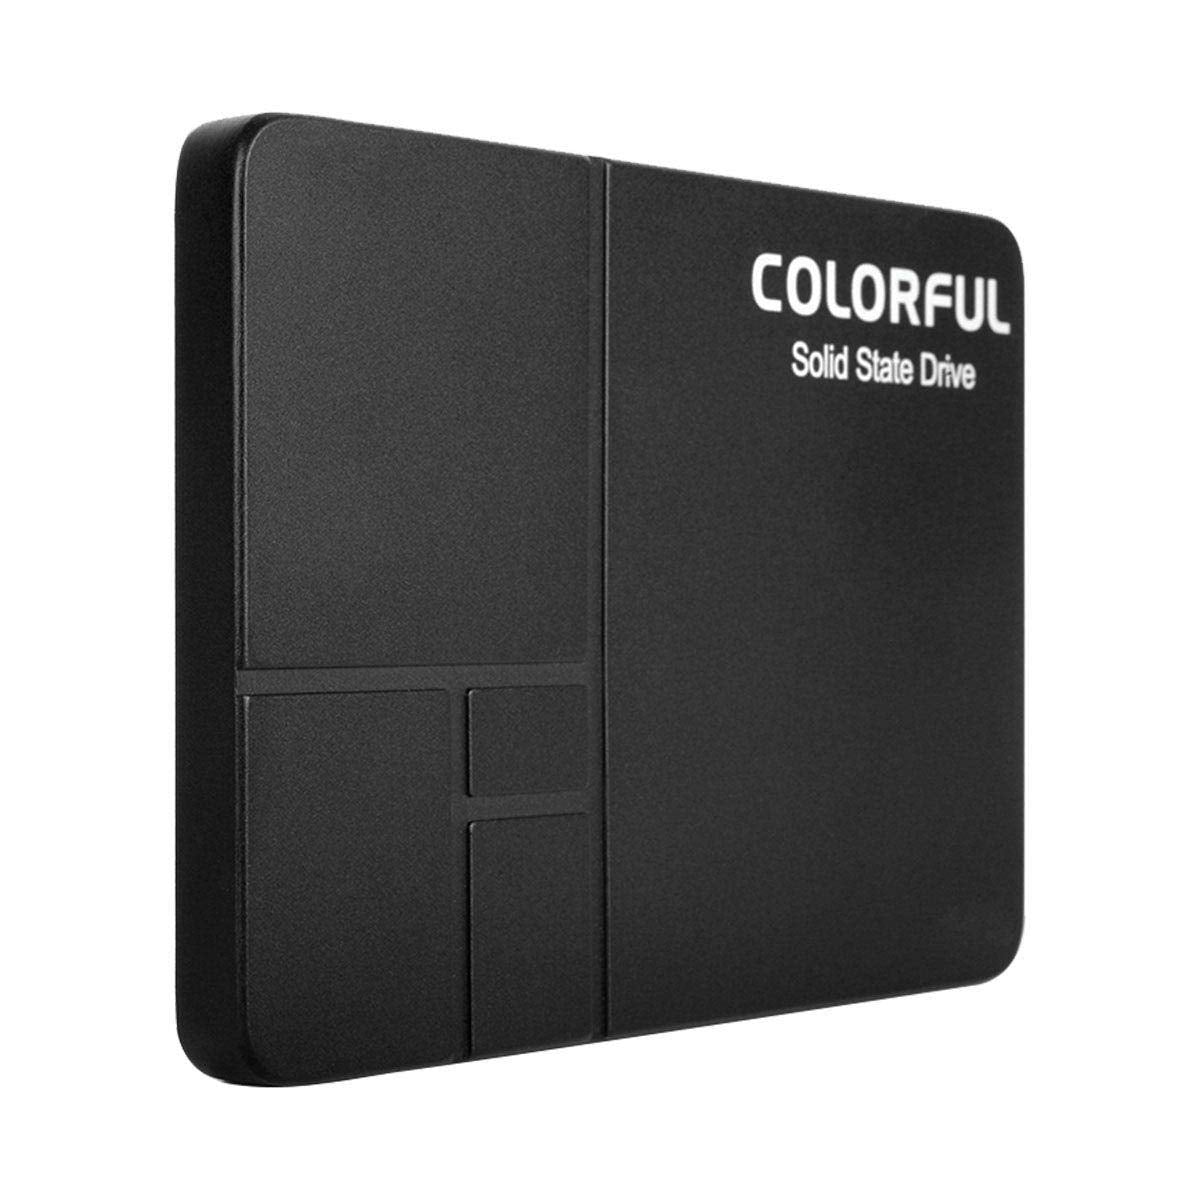 Colorful SL300 128GB 3D NAND SATA 2.5 inch Internal Solid State Drive SSD